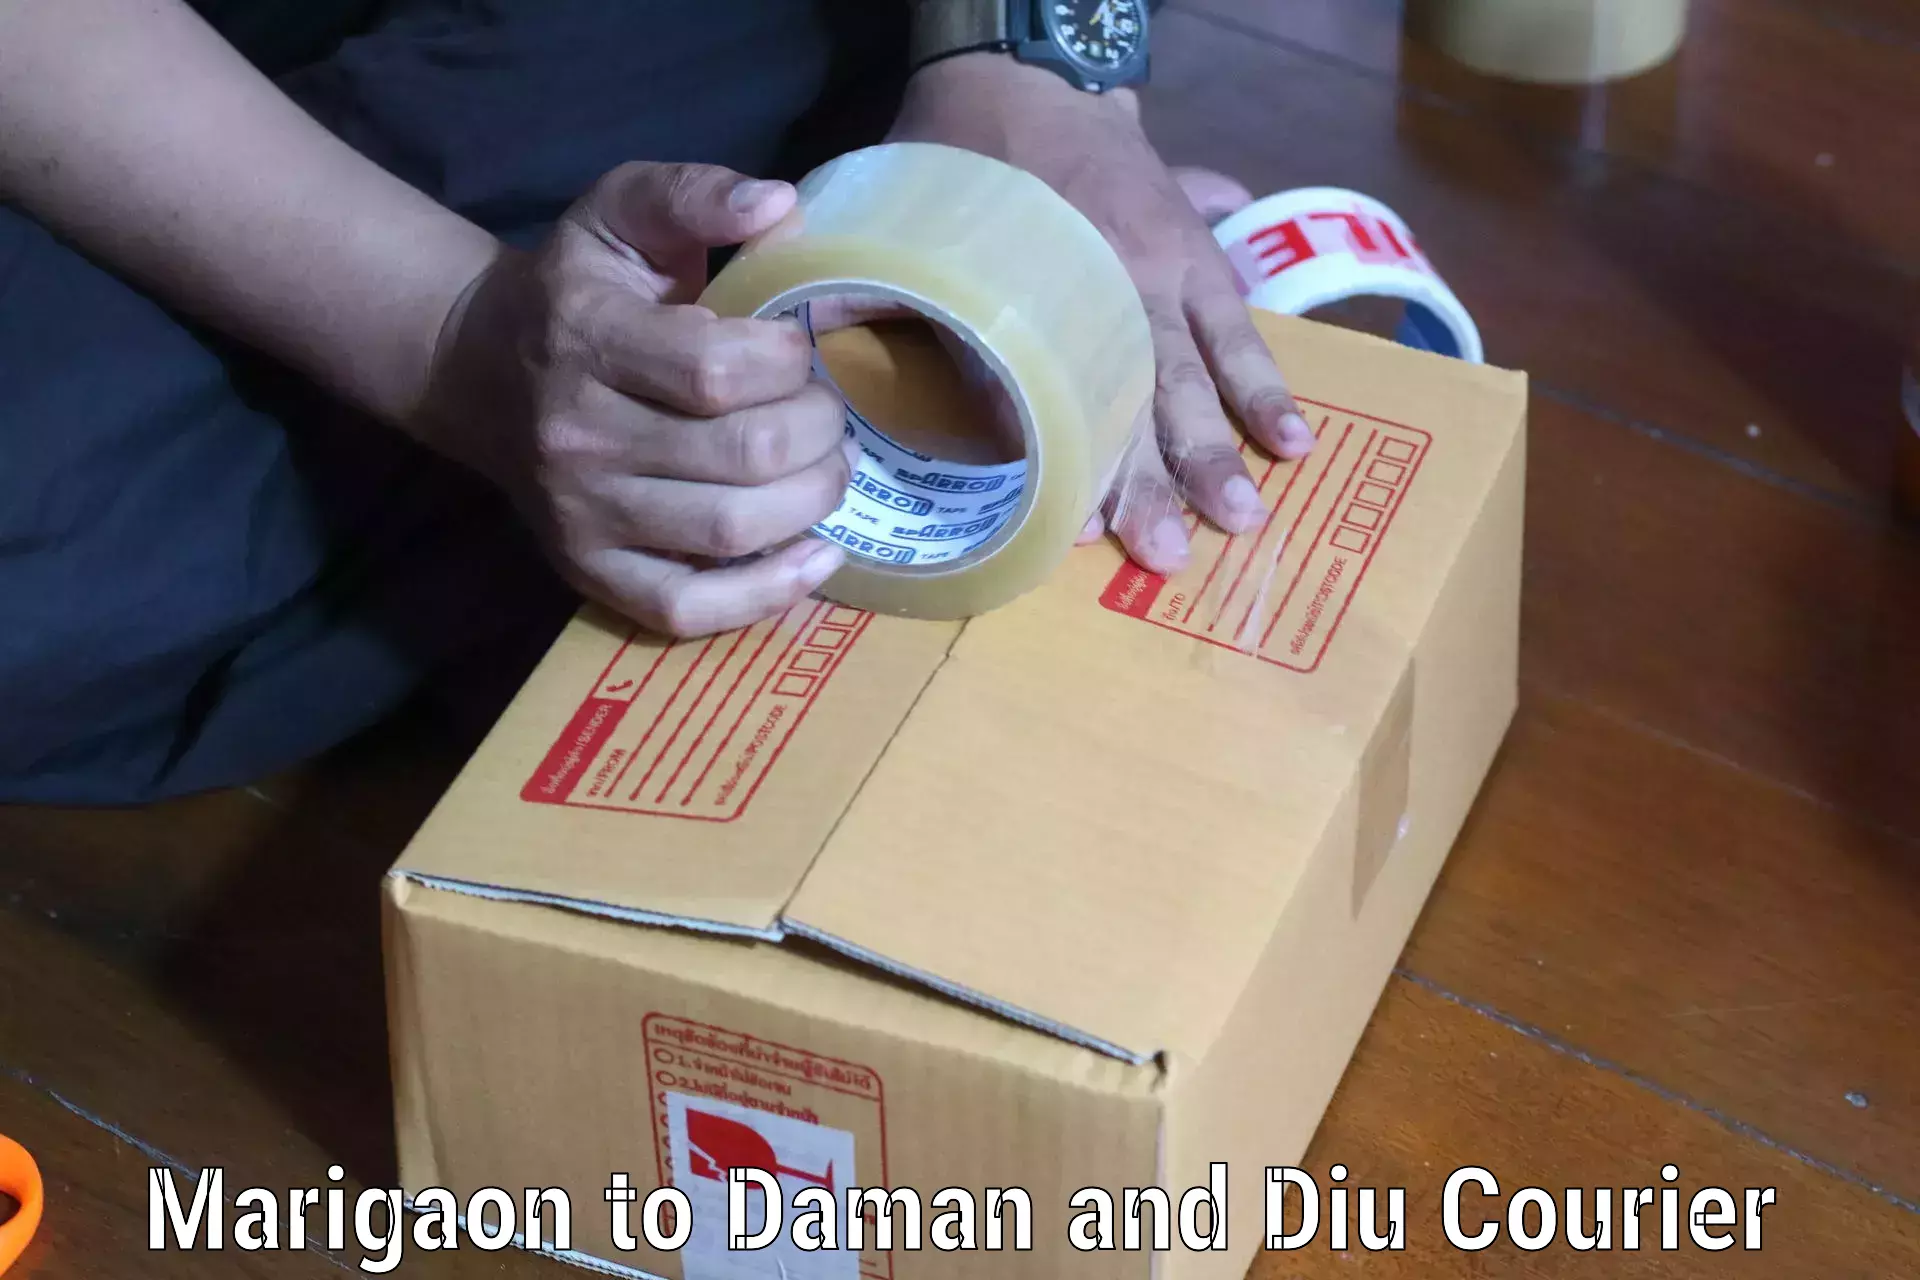 Global courier networks Marigaon to Daman and Diu